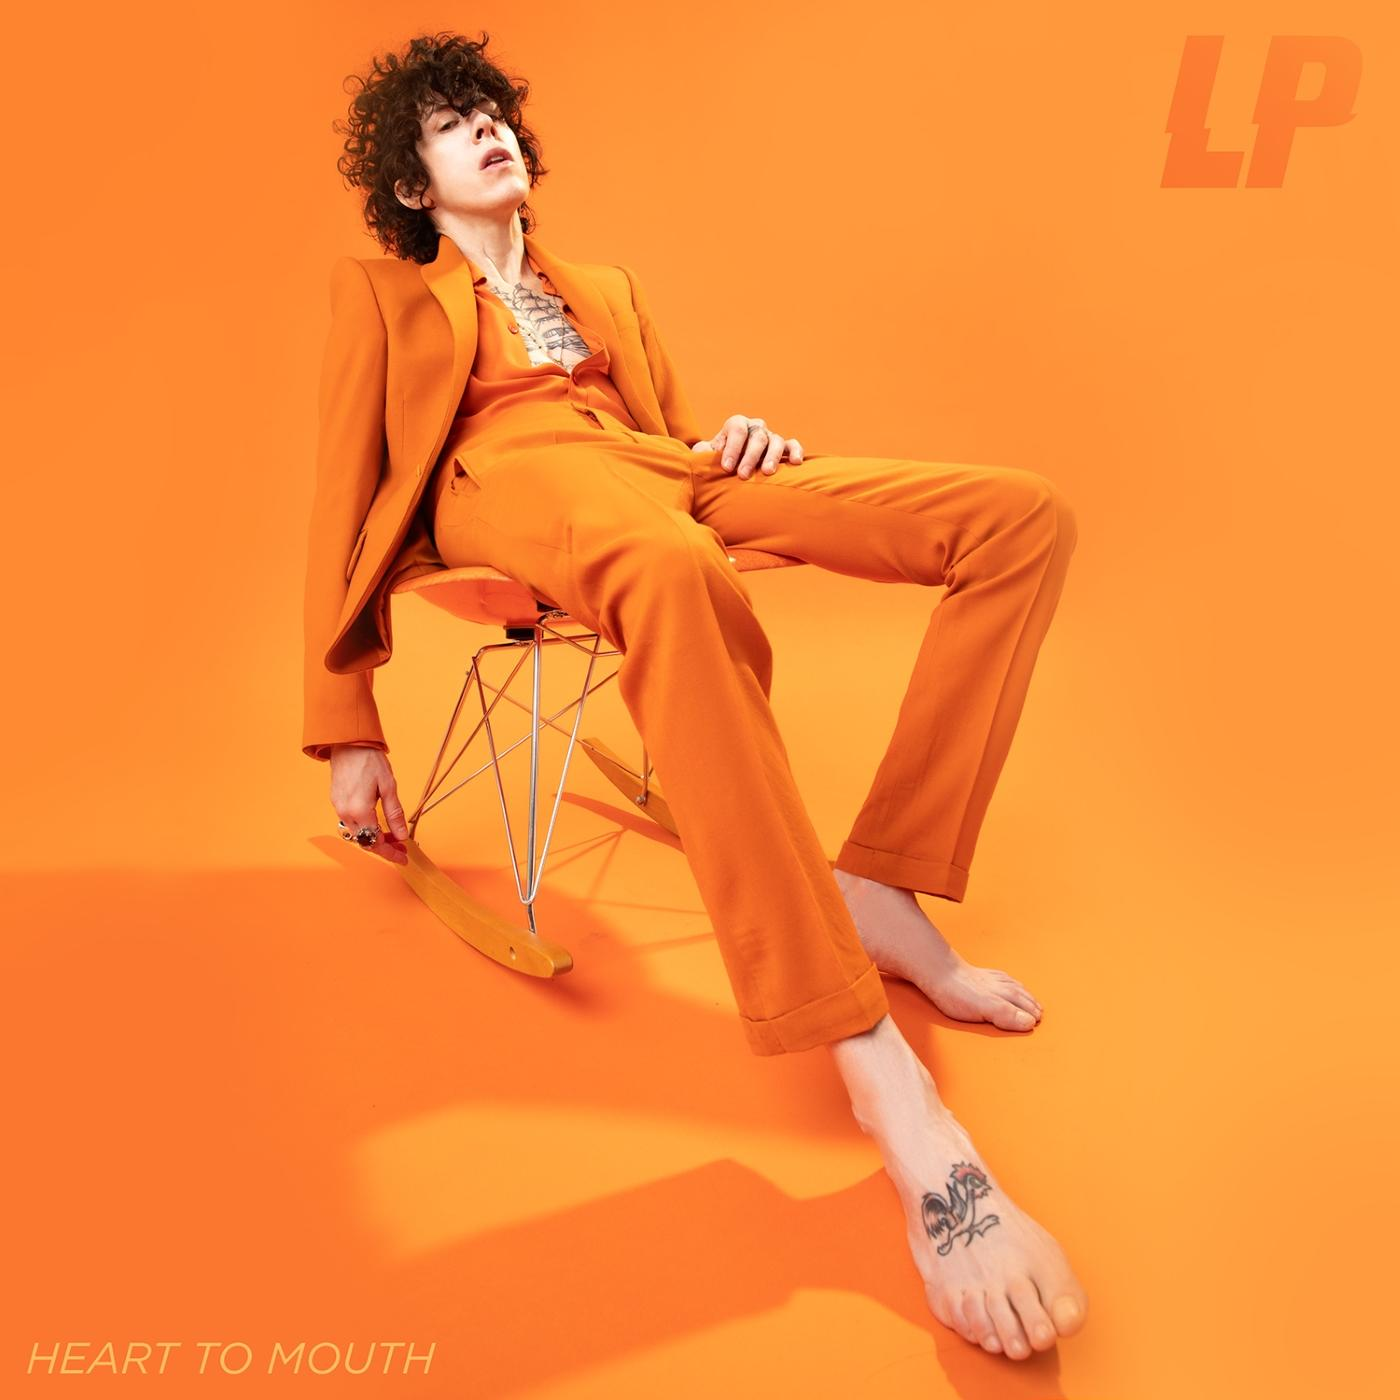 Lp - Heart to Mouth - (CD)